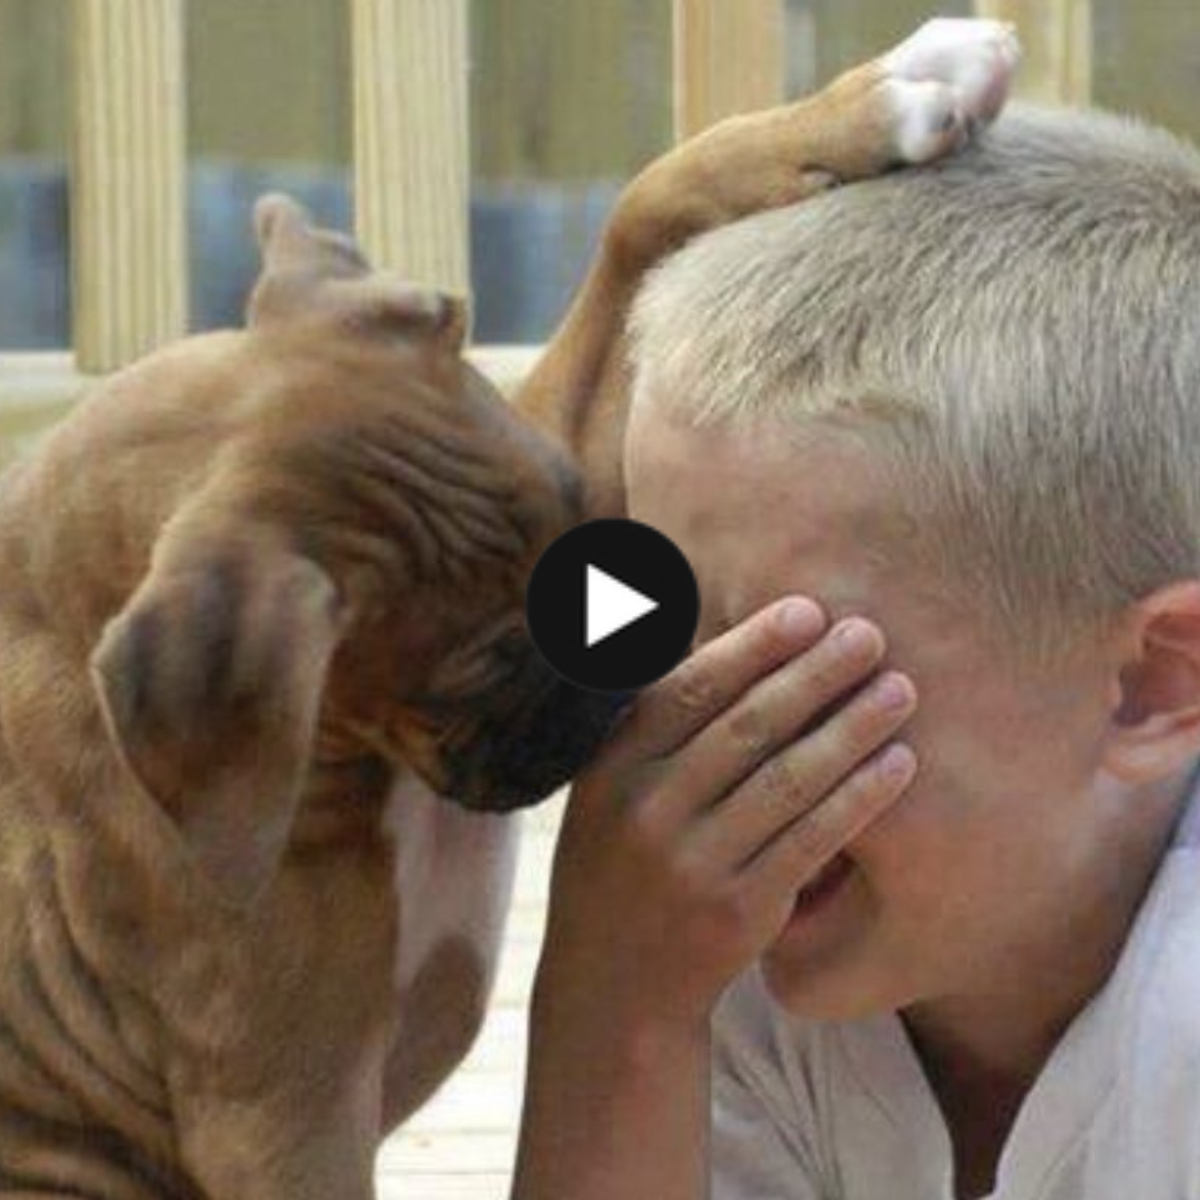 Millions of hearts melt when they see a dog comfort a crying kid by putting its paw on his head.